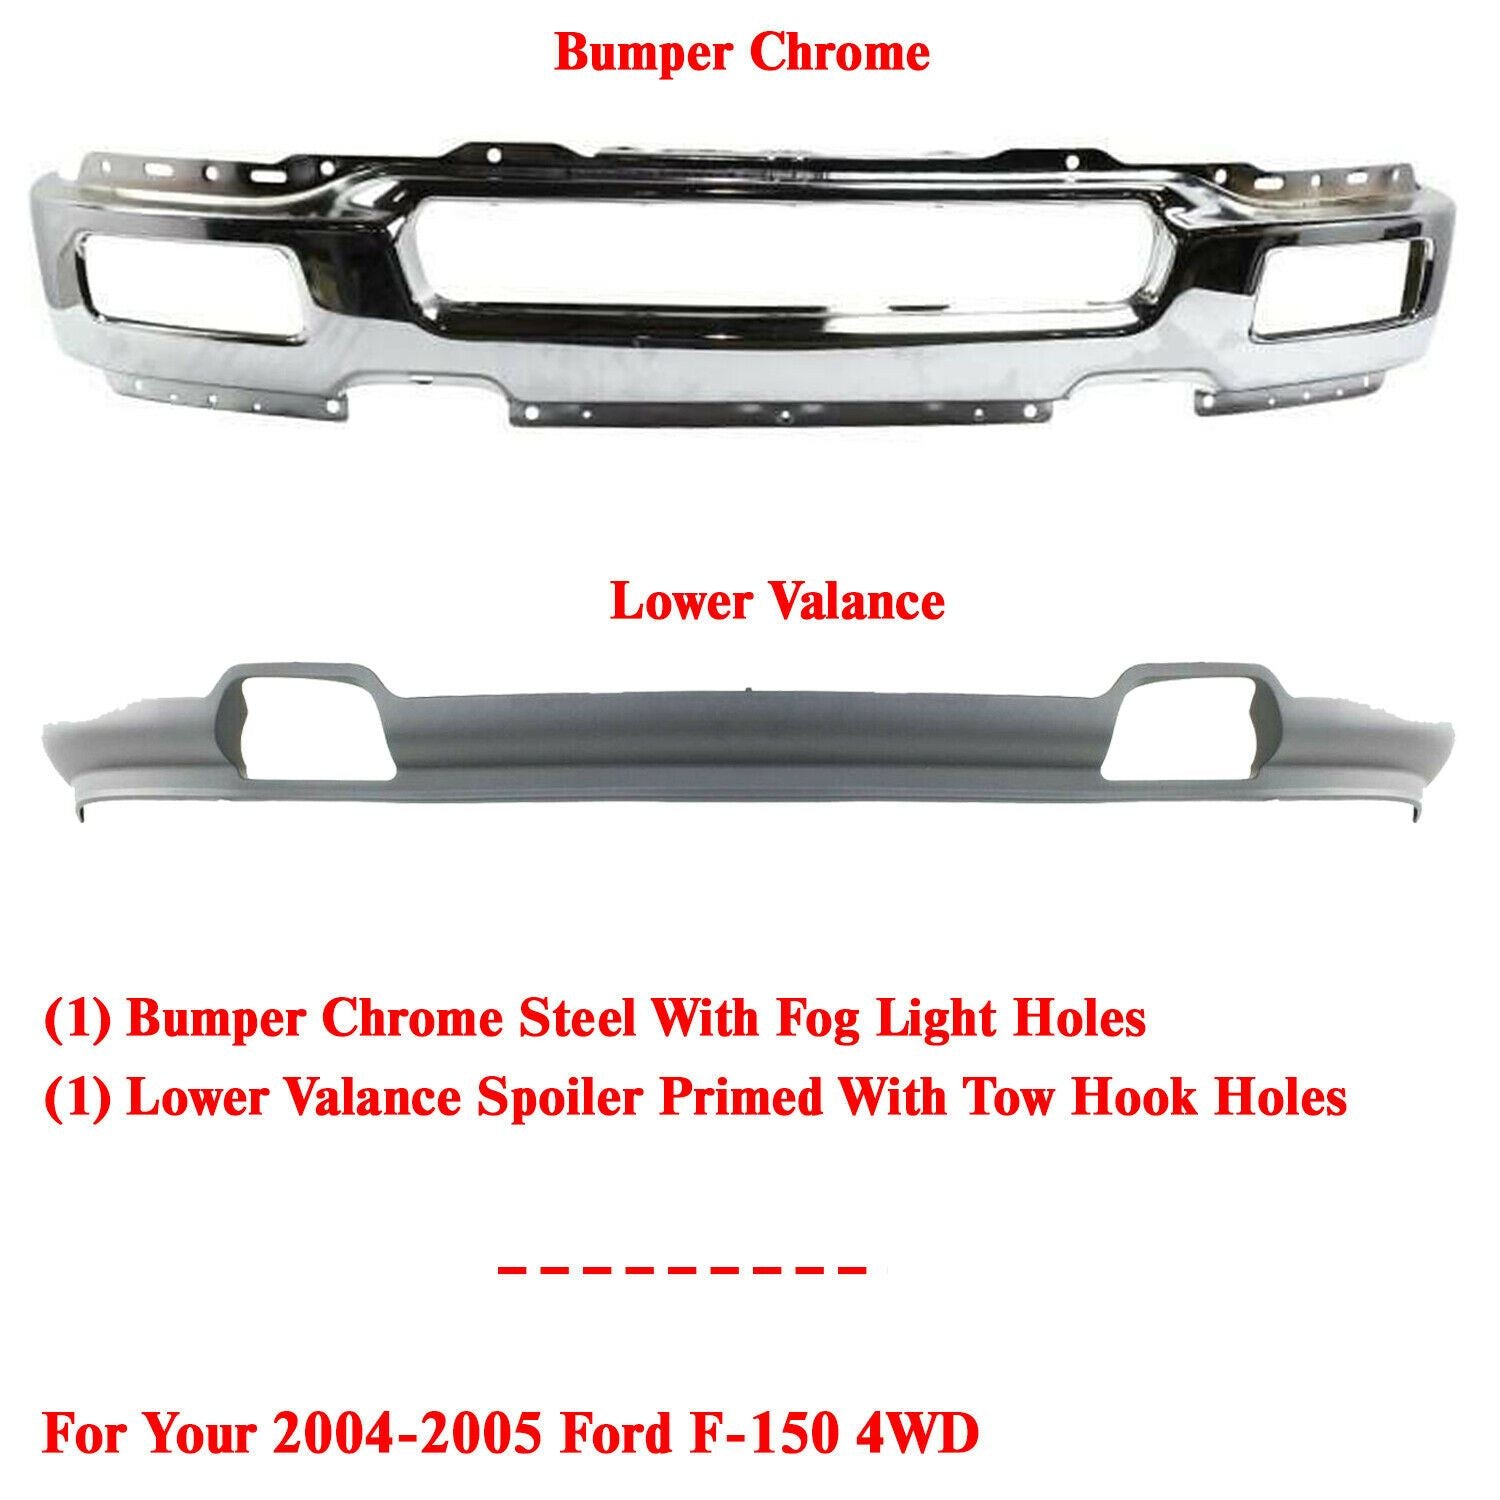 Front Bumper Chrome Steel + Lower Valance Air Deflector For 04-05